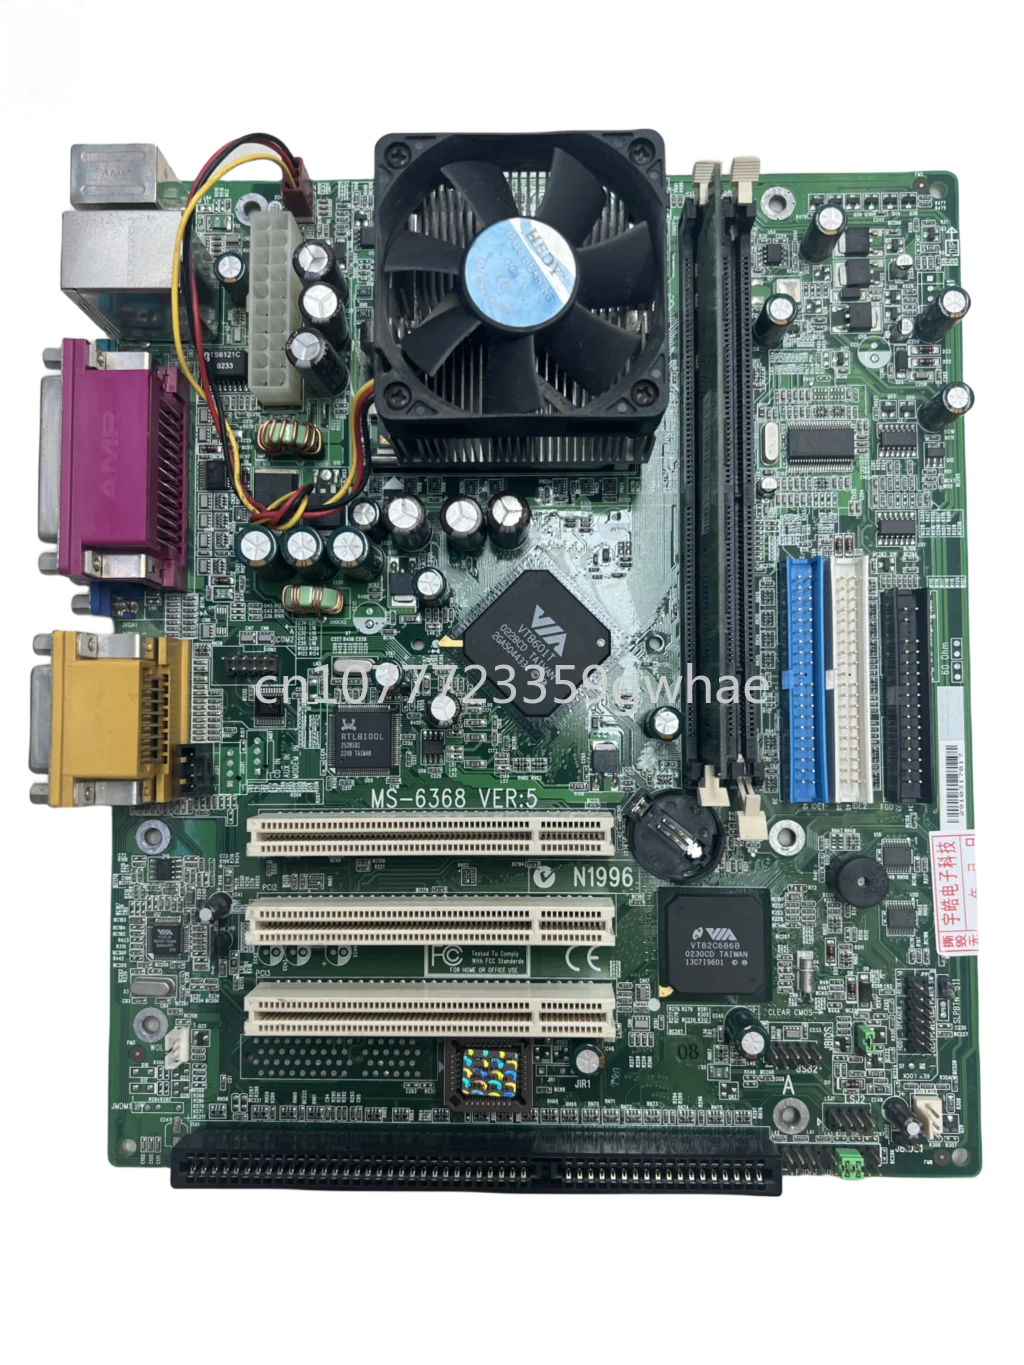 

8601T100% tested original MS-6368 ISA industrial board motherboard with 3PCI VGA LPT 1 ISA slot and CPU memory fan